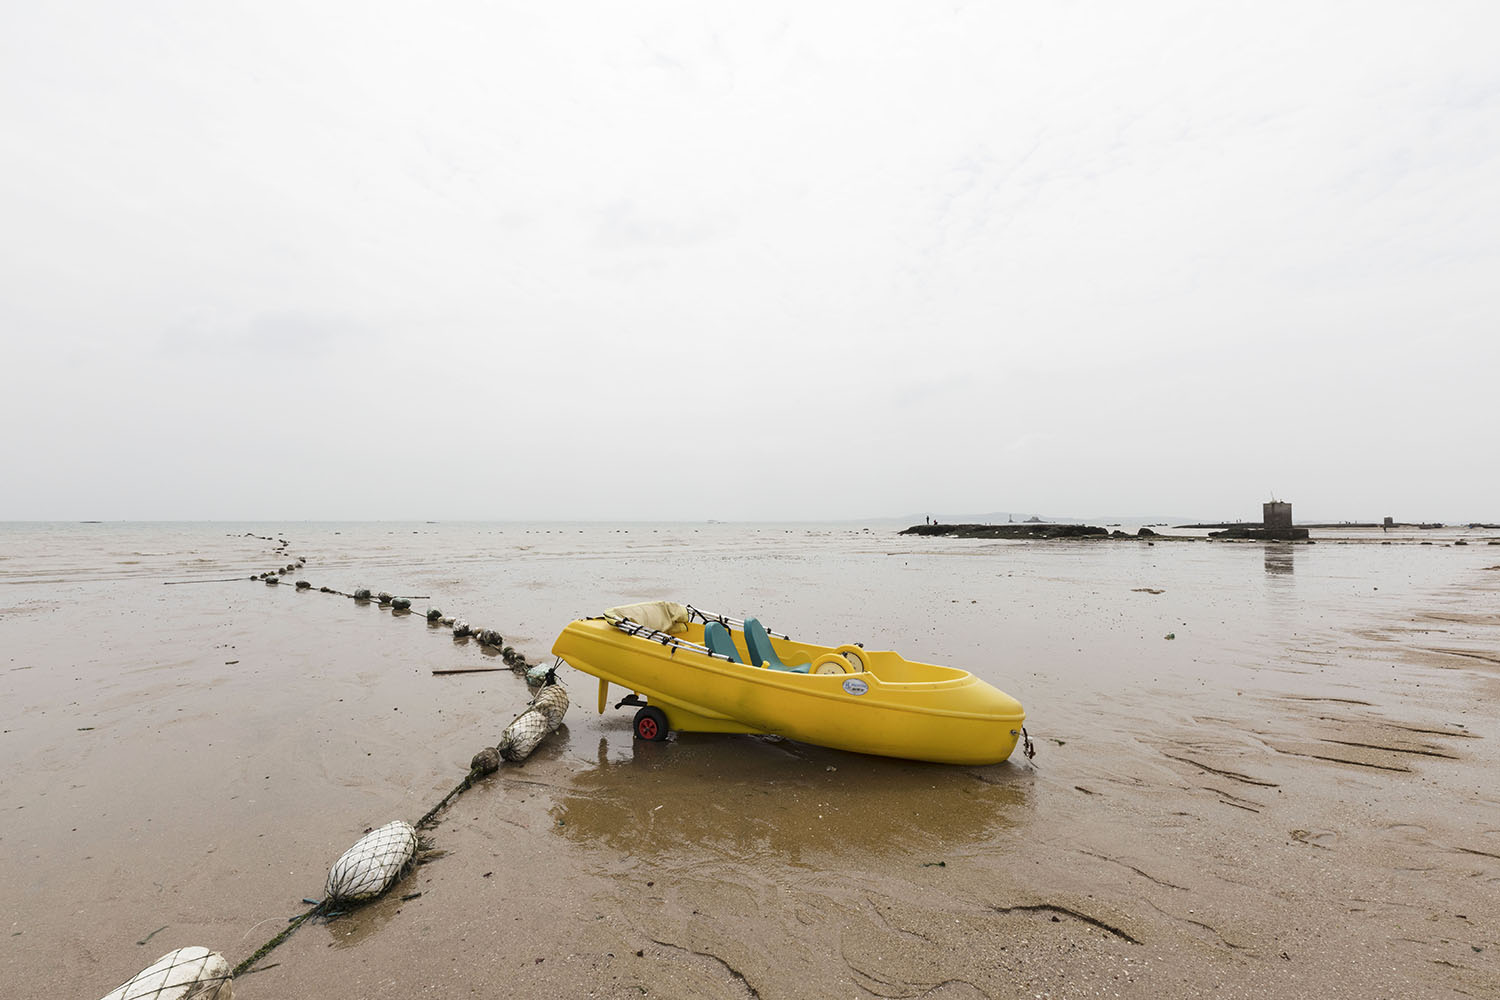 Small boat for tourists and beach goers at Guanyinshan Fantasy Beach. Xiamen, China. 2018.